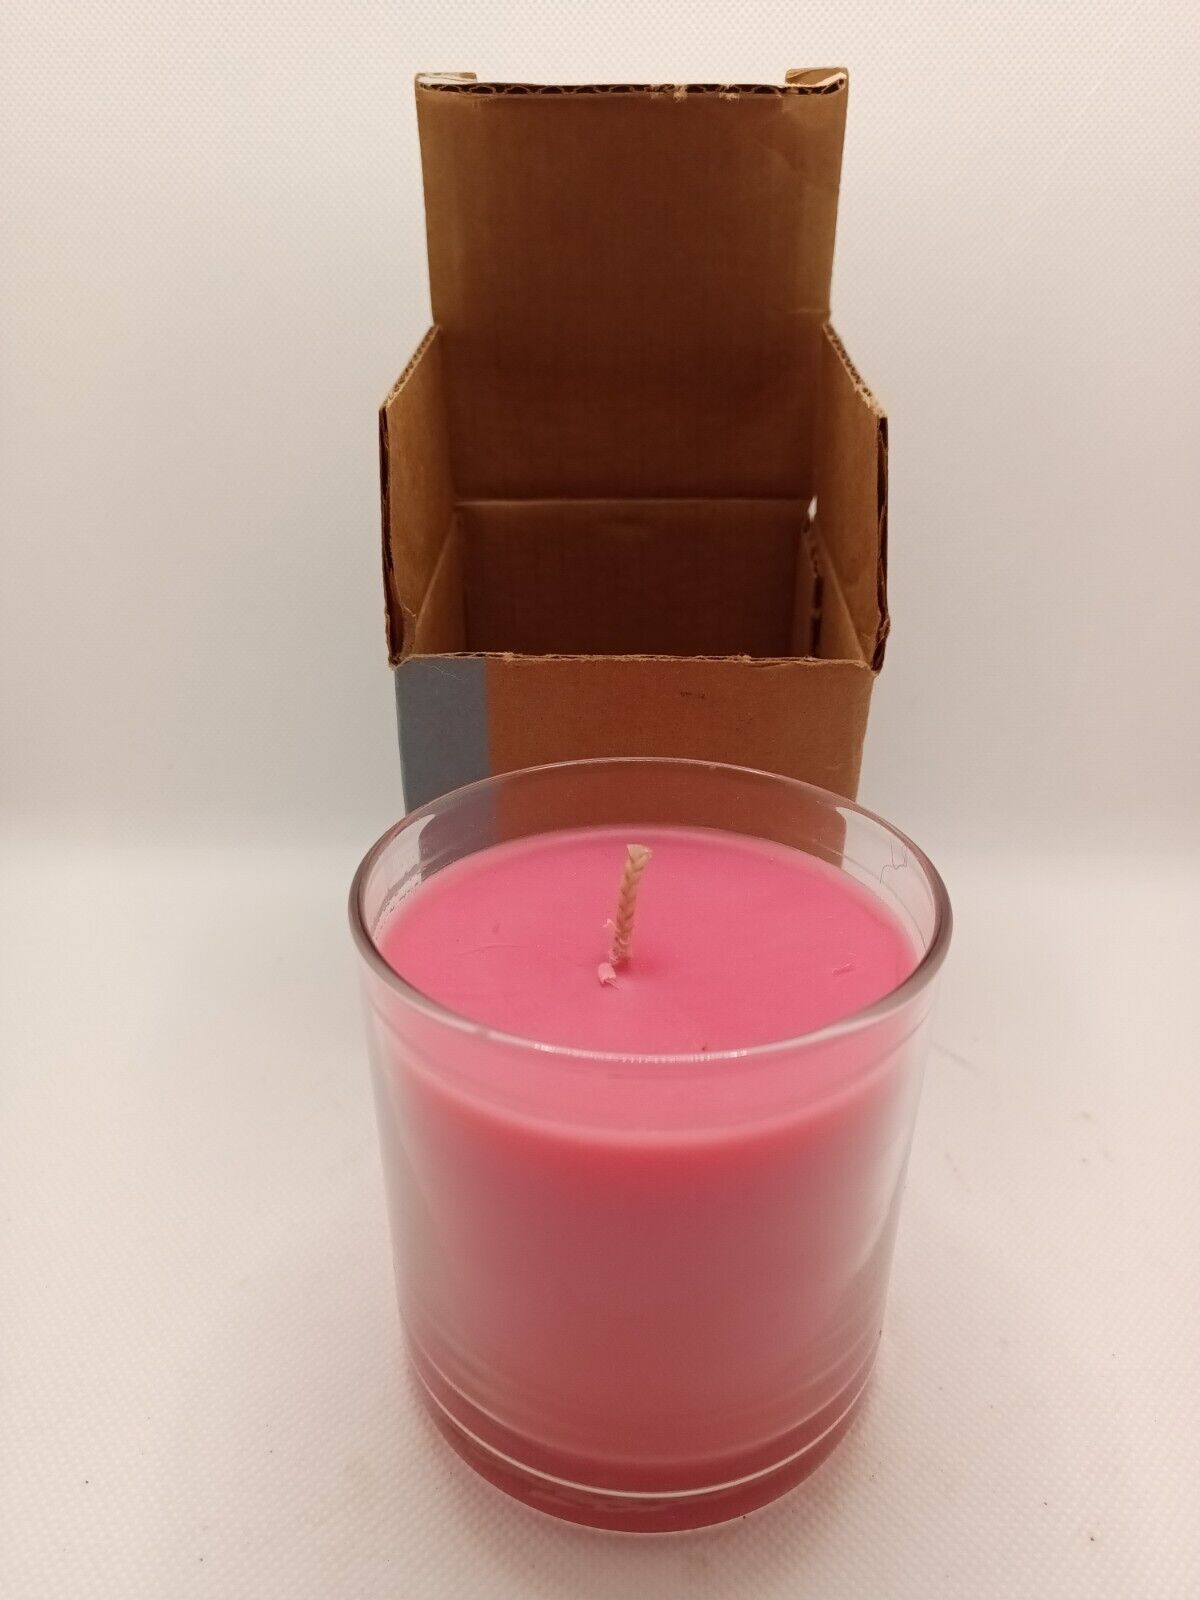 PartyLite 8 Oz Candle Cherry Blossom Retired